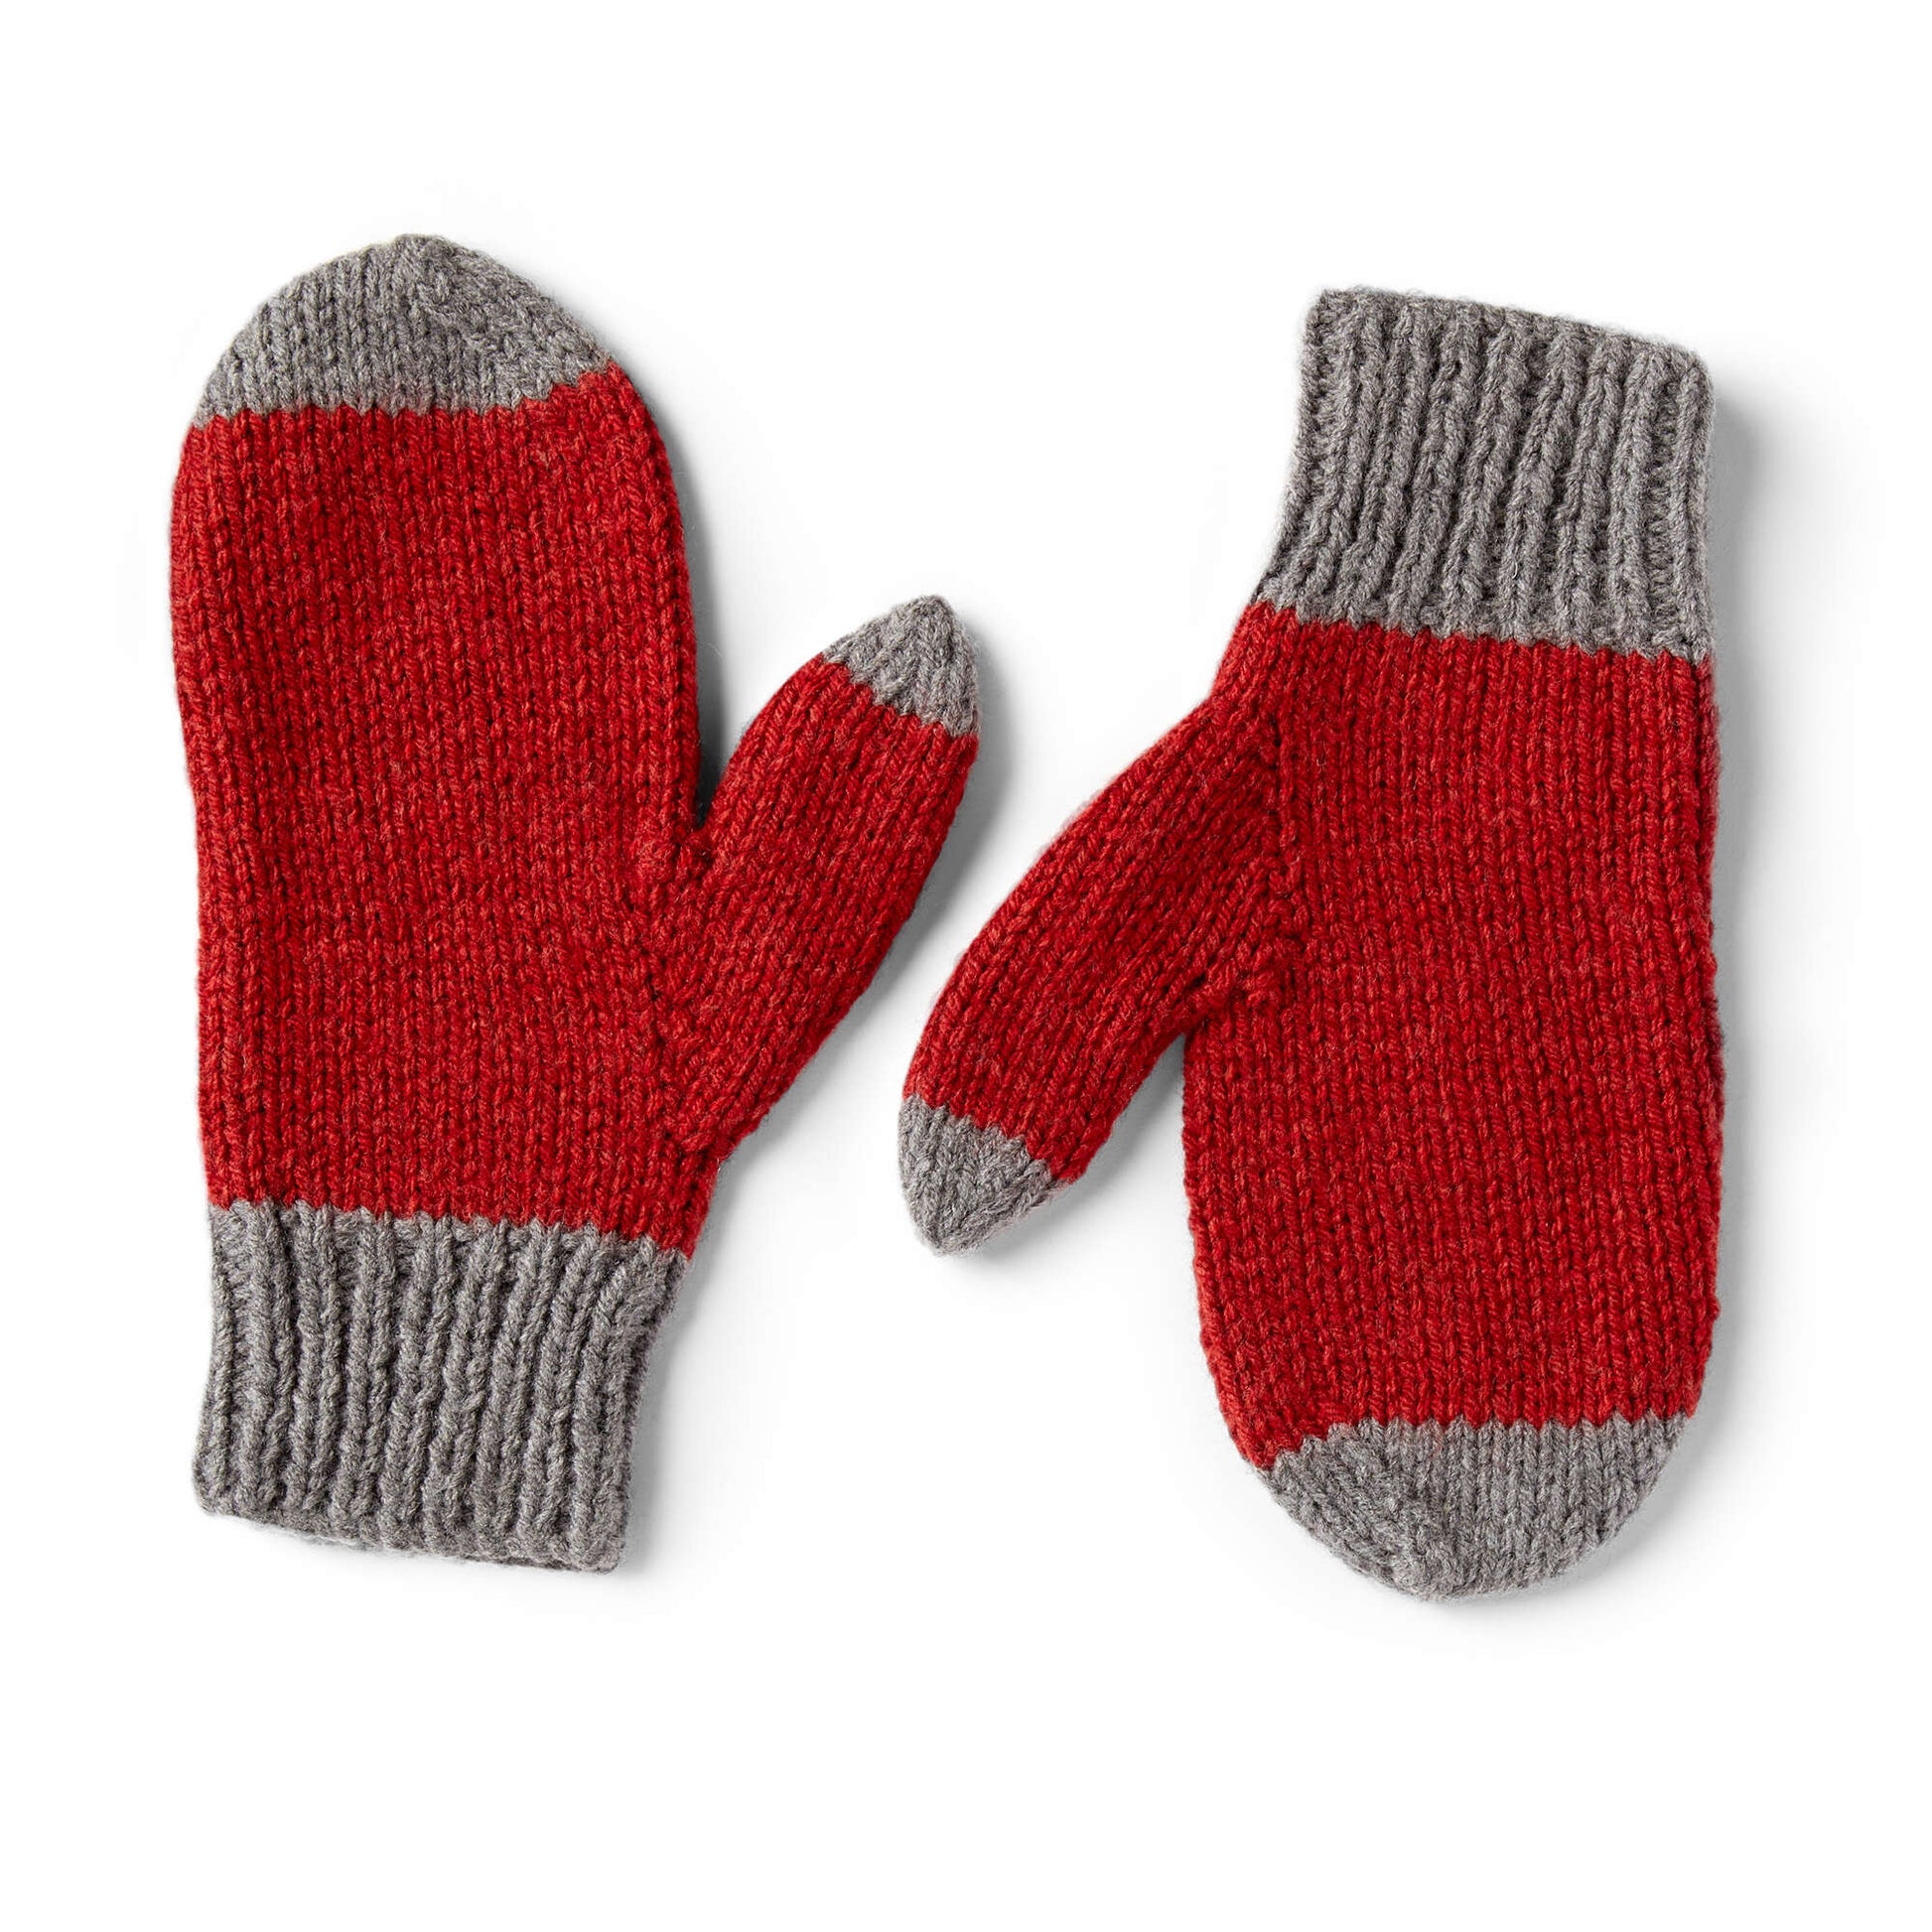 Free Red Heart Rita's Family Knit Mitts Pattern